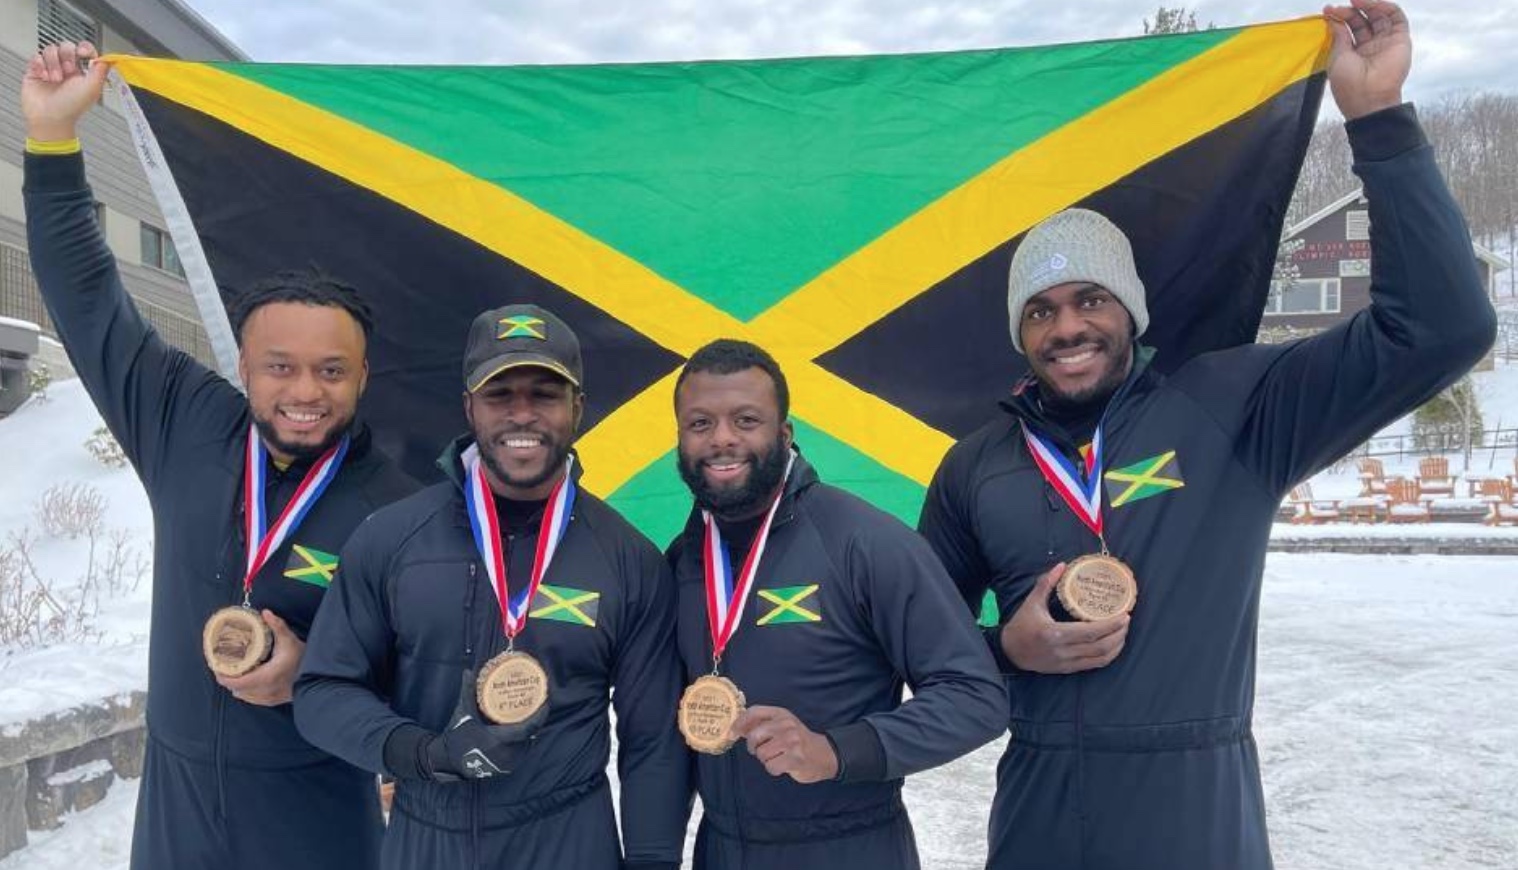 Jamaica Wins Medal In North American Bobsled Competition And Looks